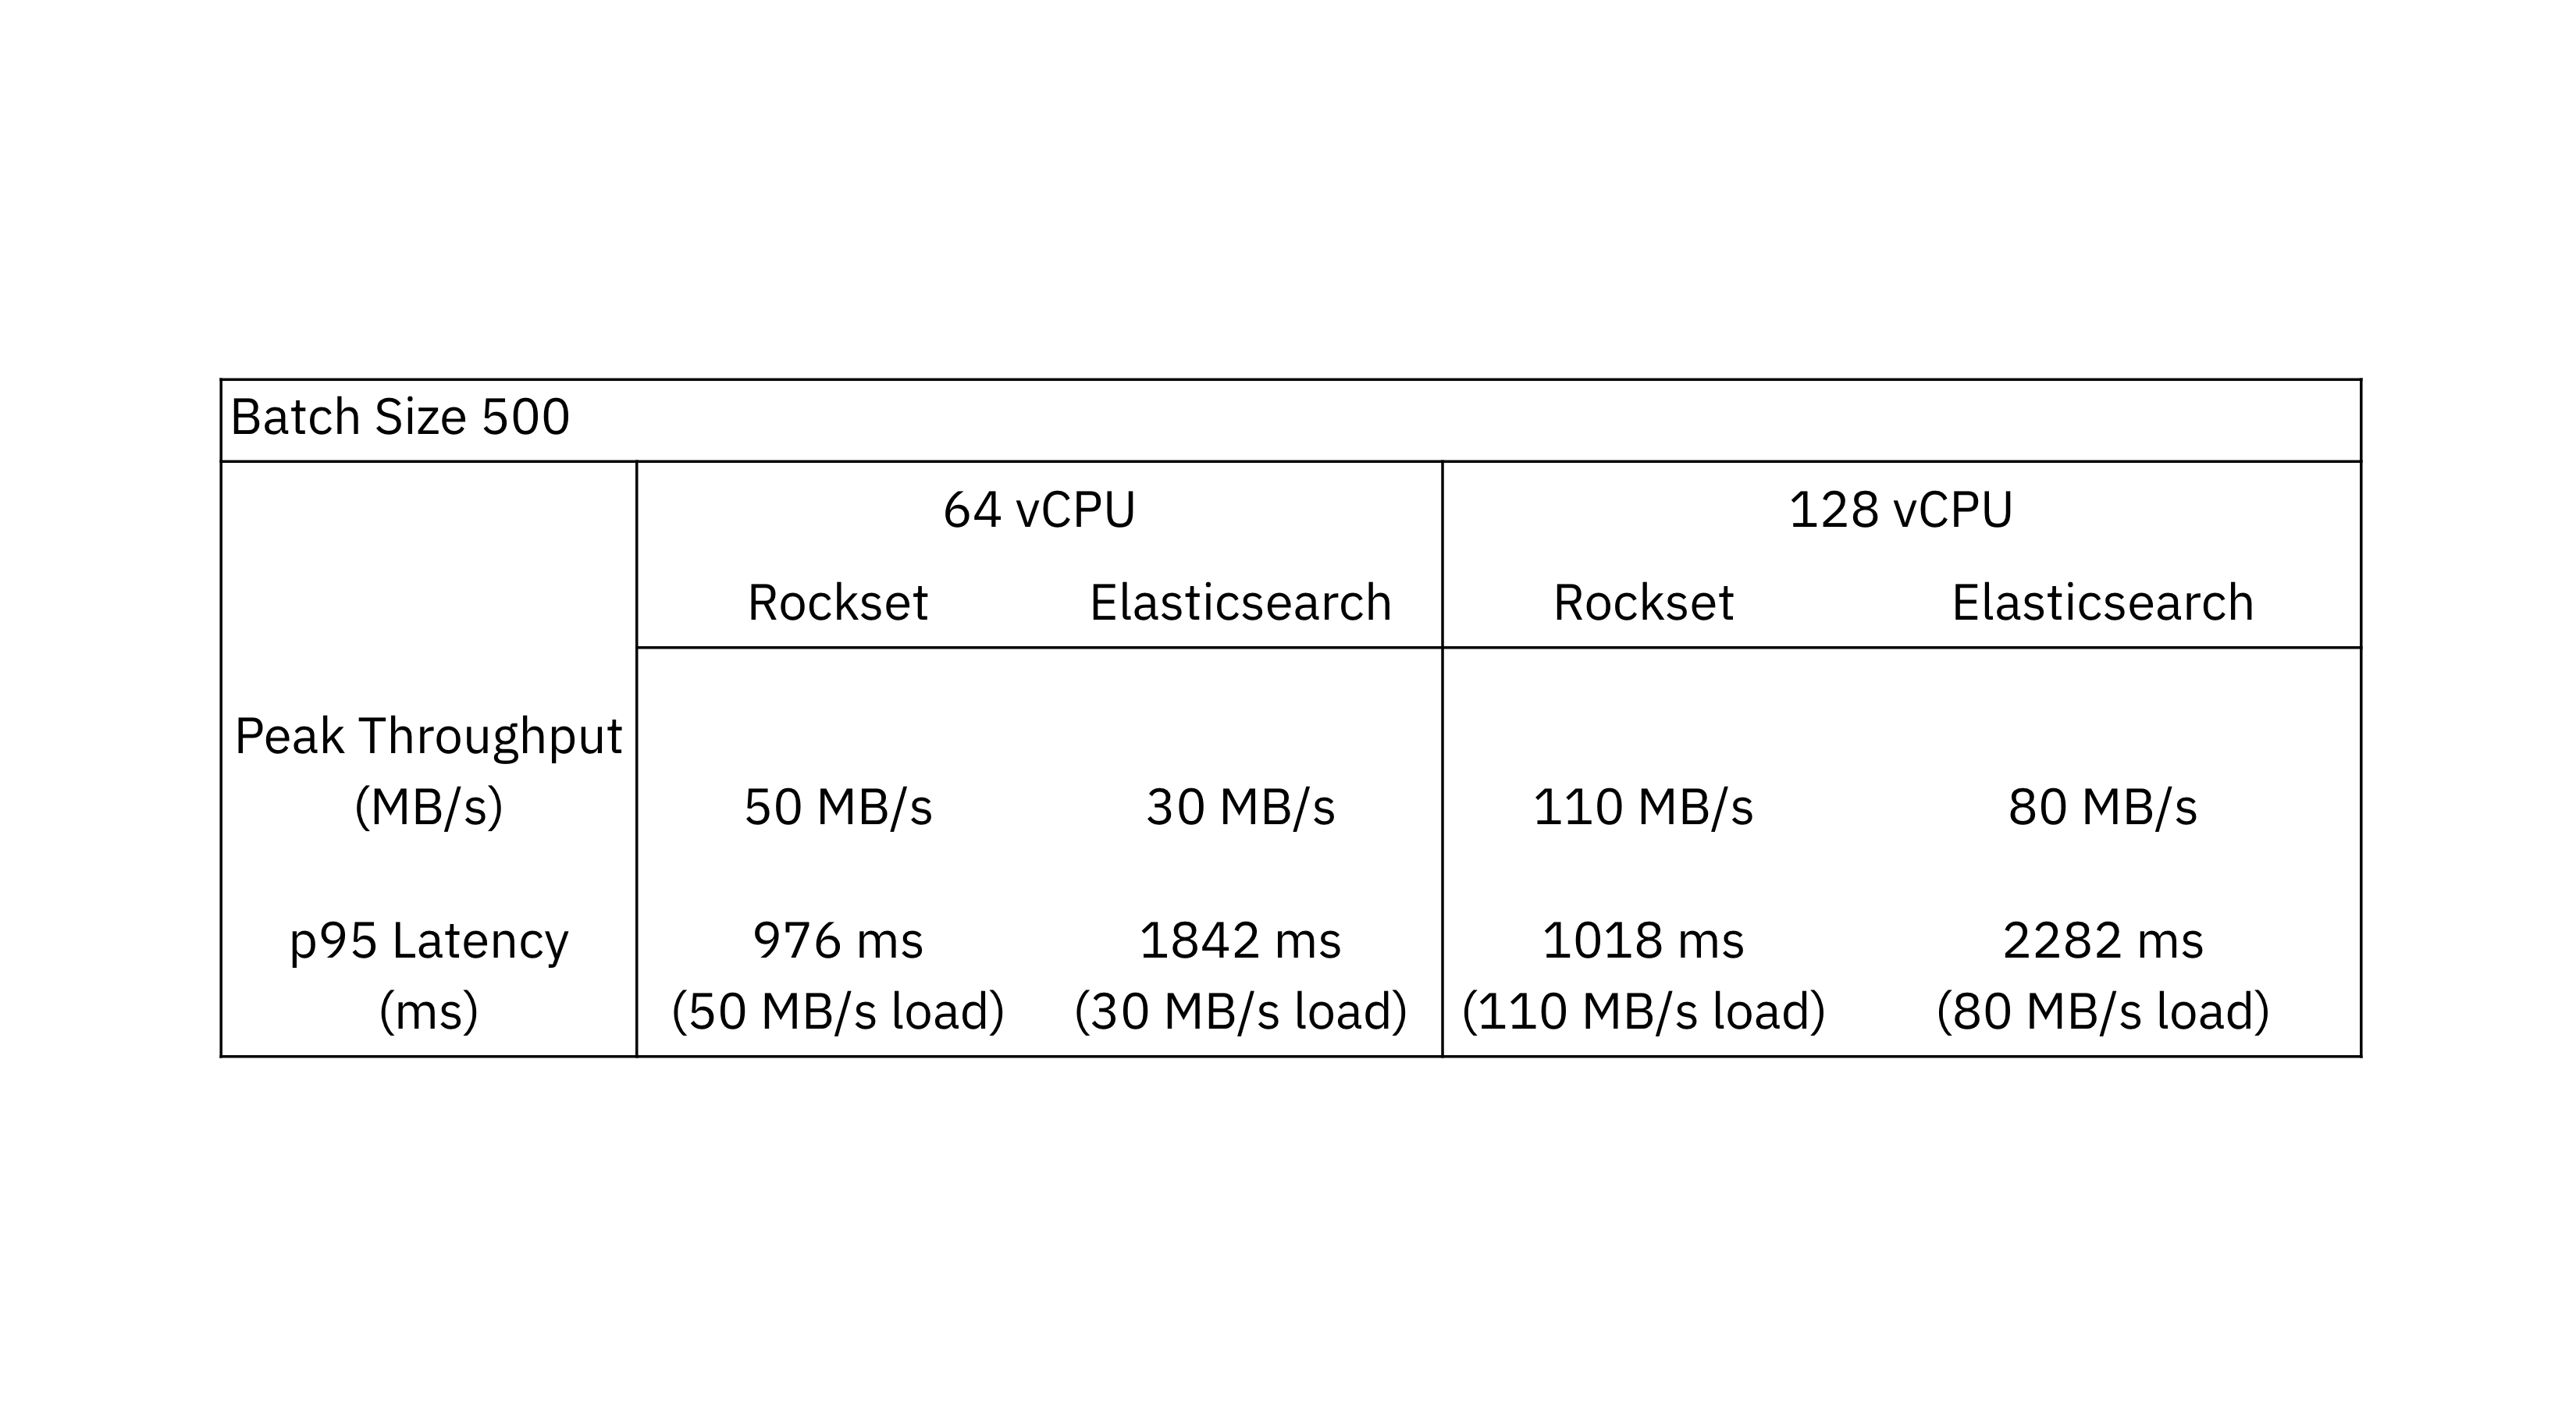 Table of the peak throughput and p95 latency of Elasticsearch and Rockset. Databases were evaluated using vCPU 64 and vCPU 128 instances and a batch size of 500.